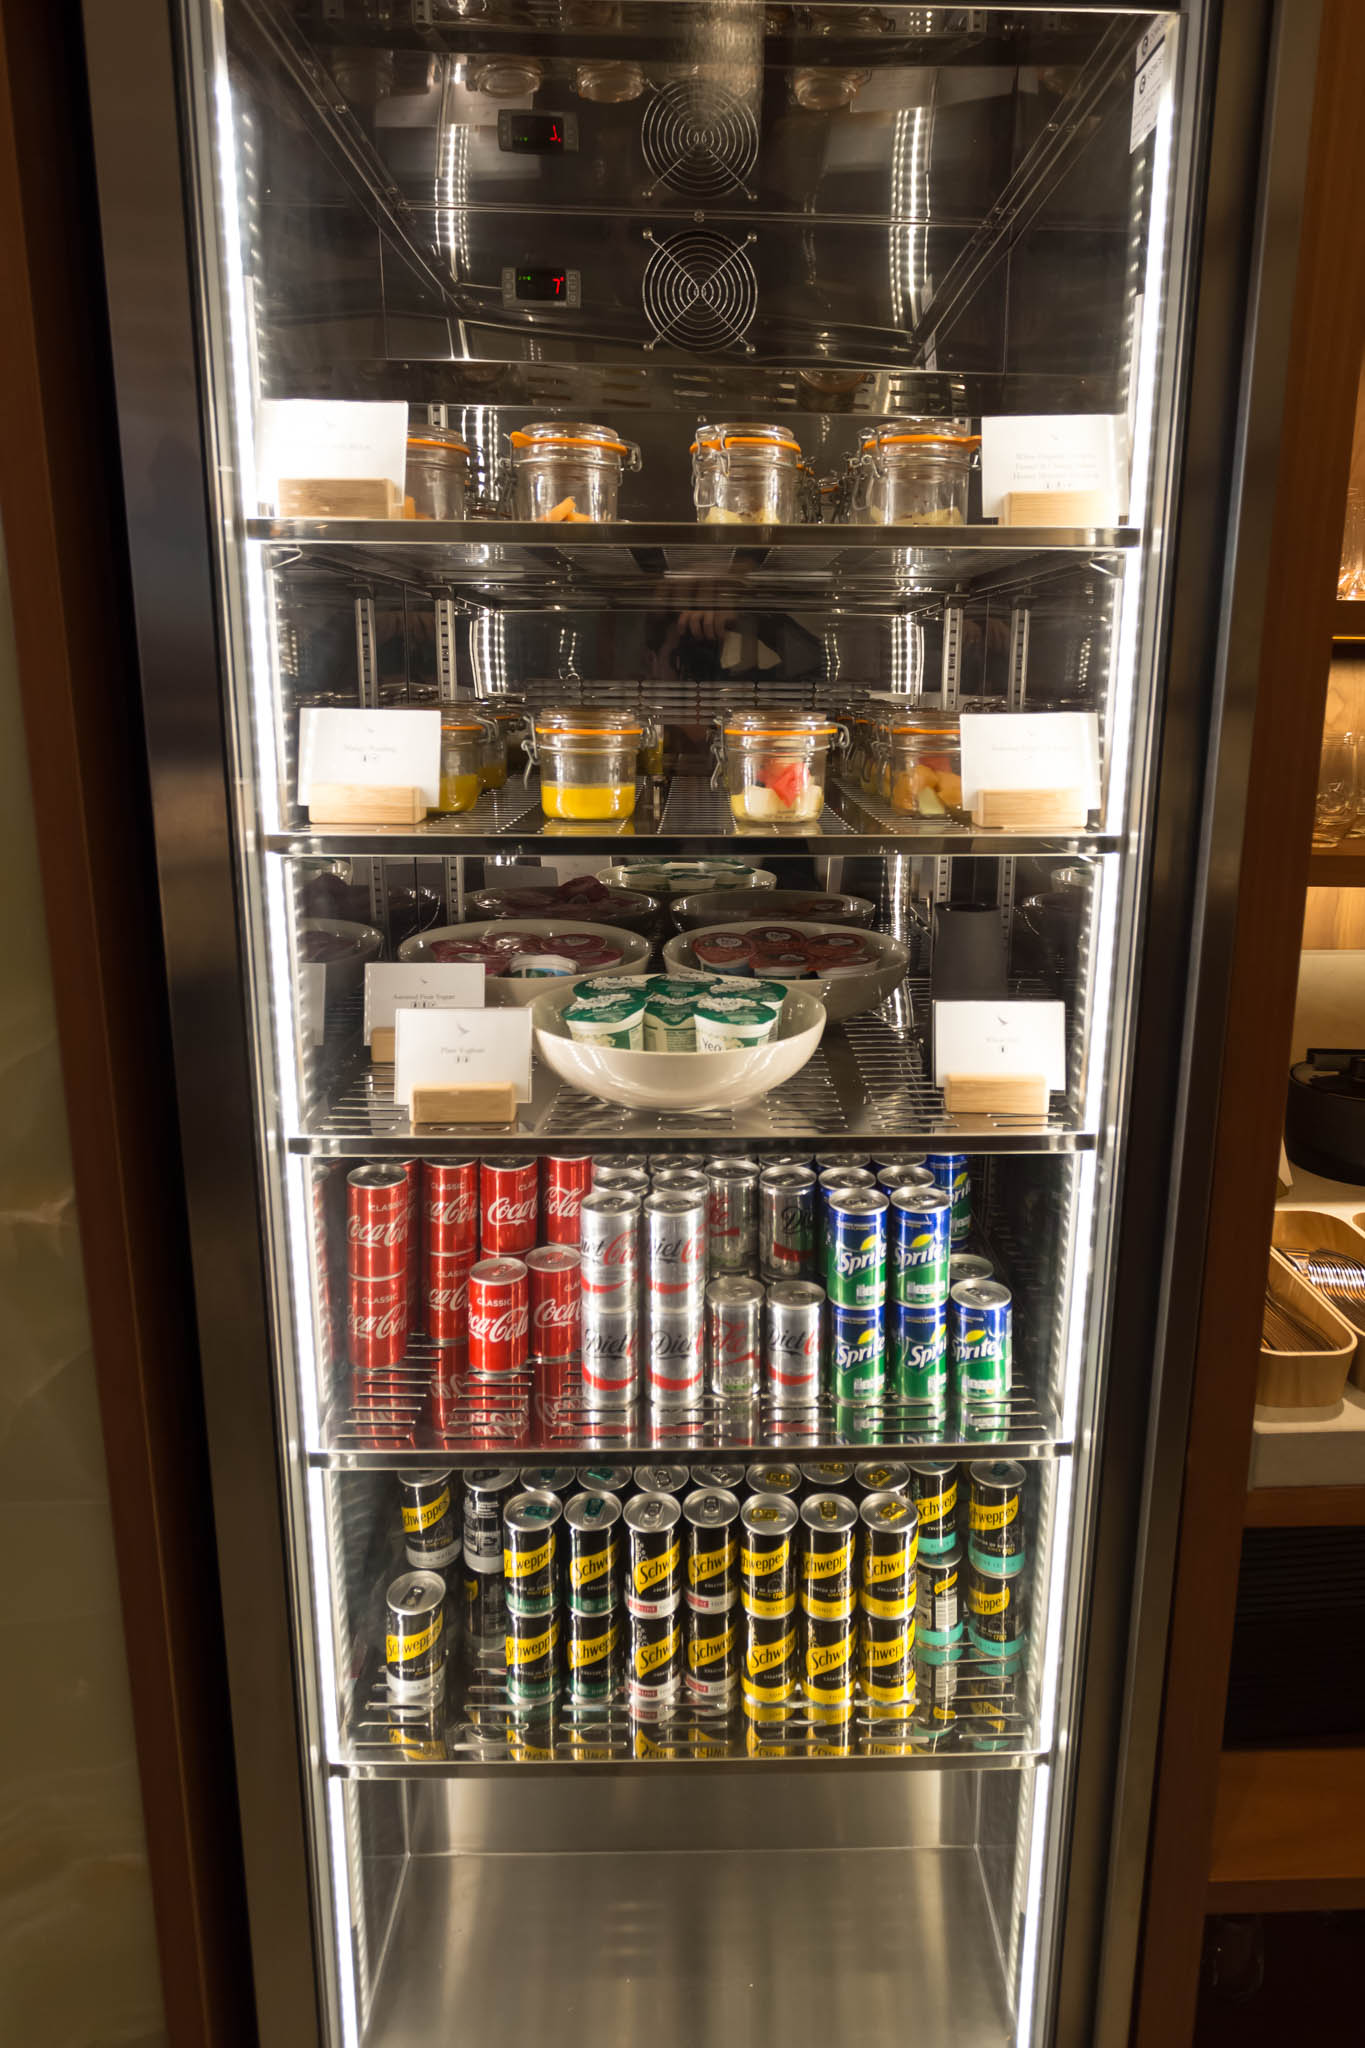 a refrigerator with cans and cans of food